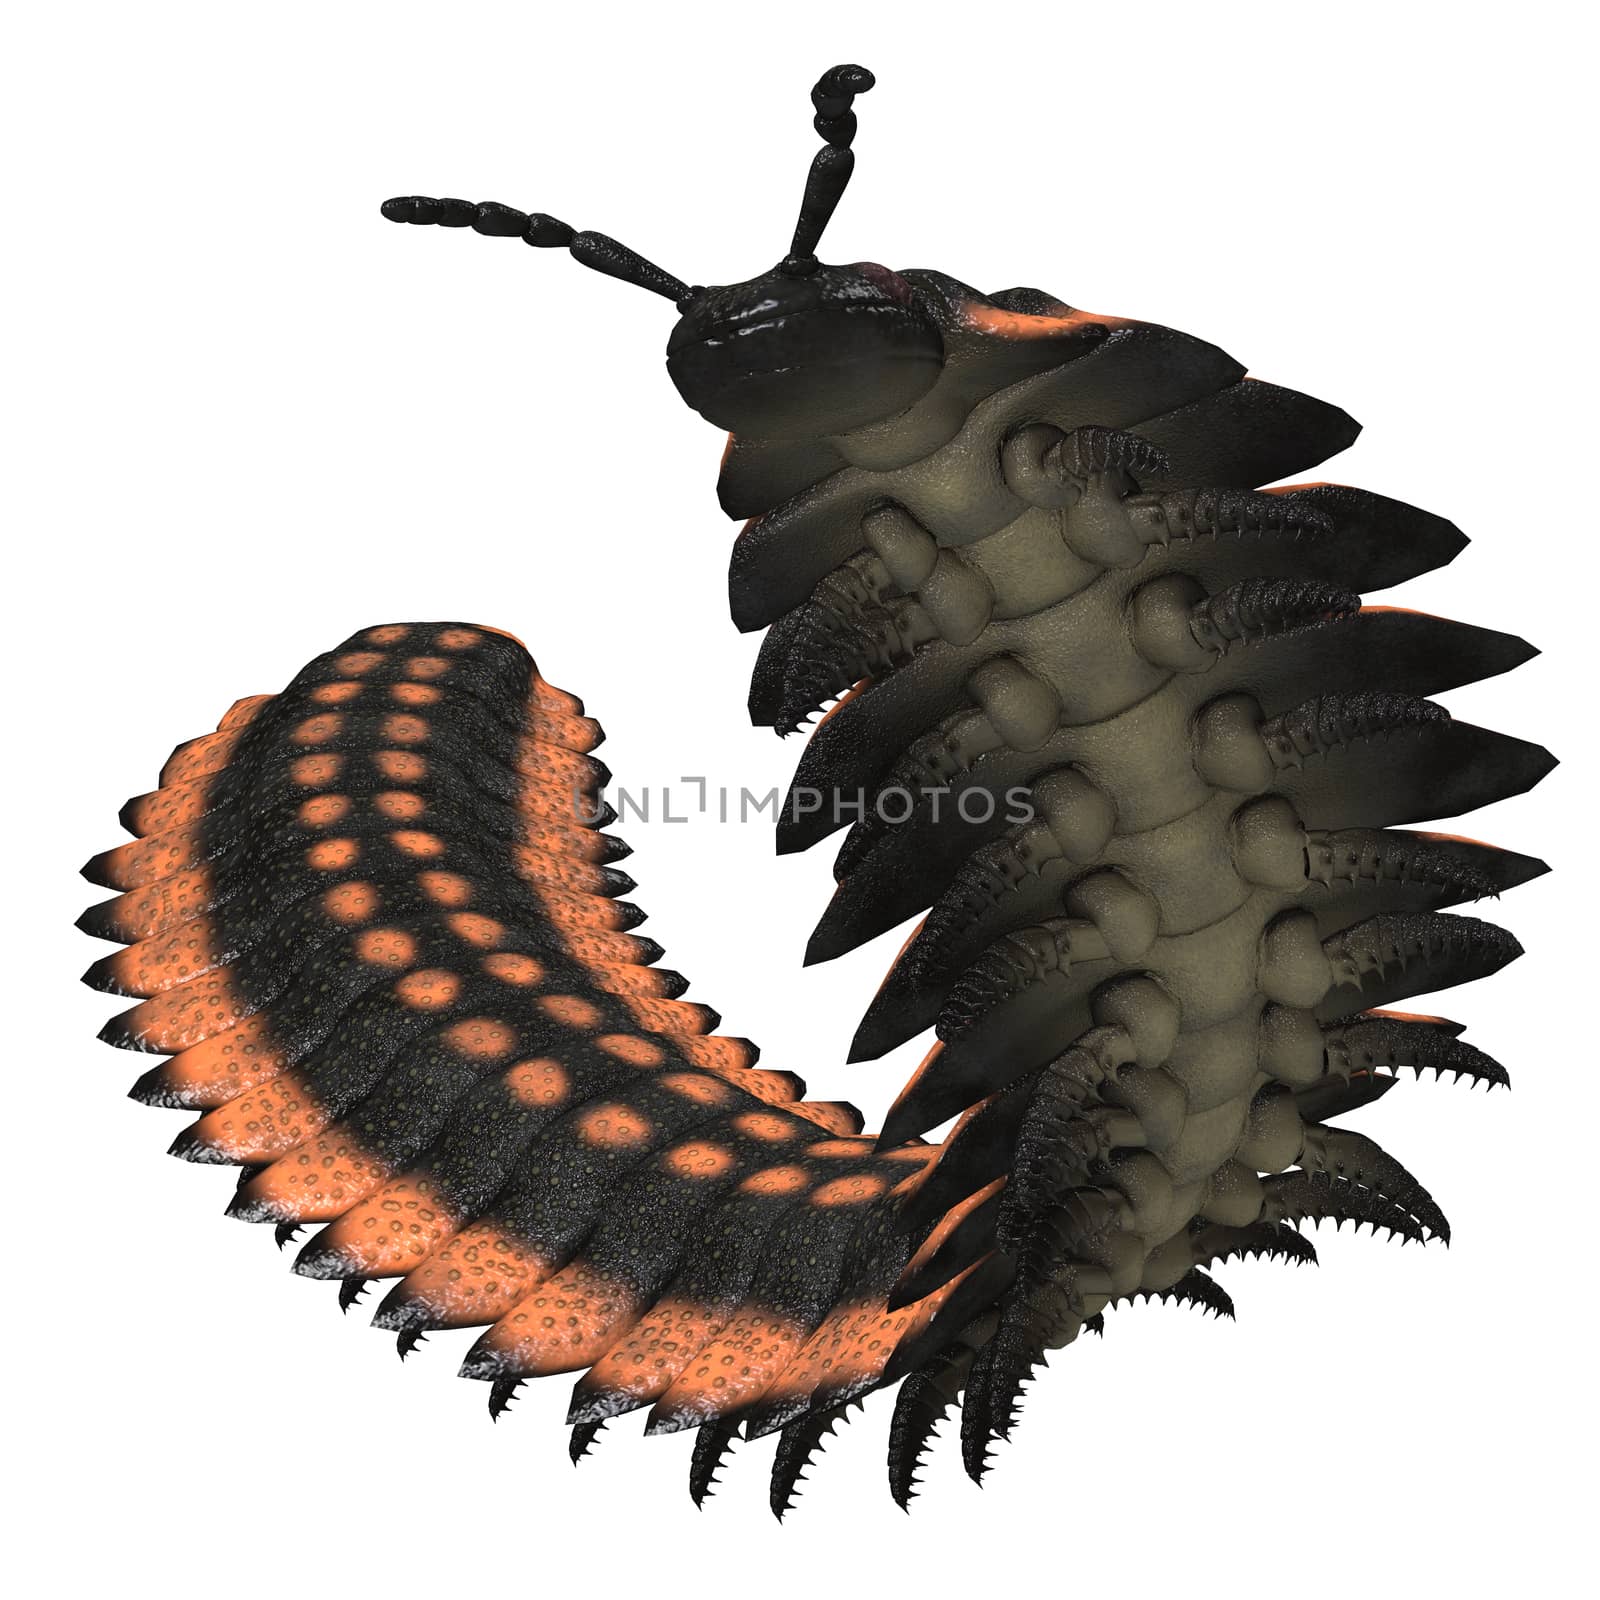 Arthropleura was a giant insect invertebrate that lived in North America and Scotland during the Carboniferous Period.